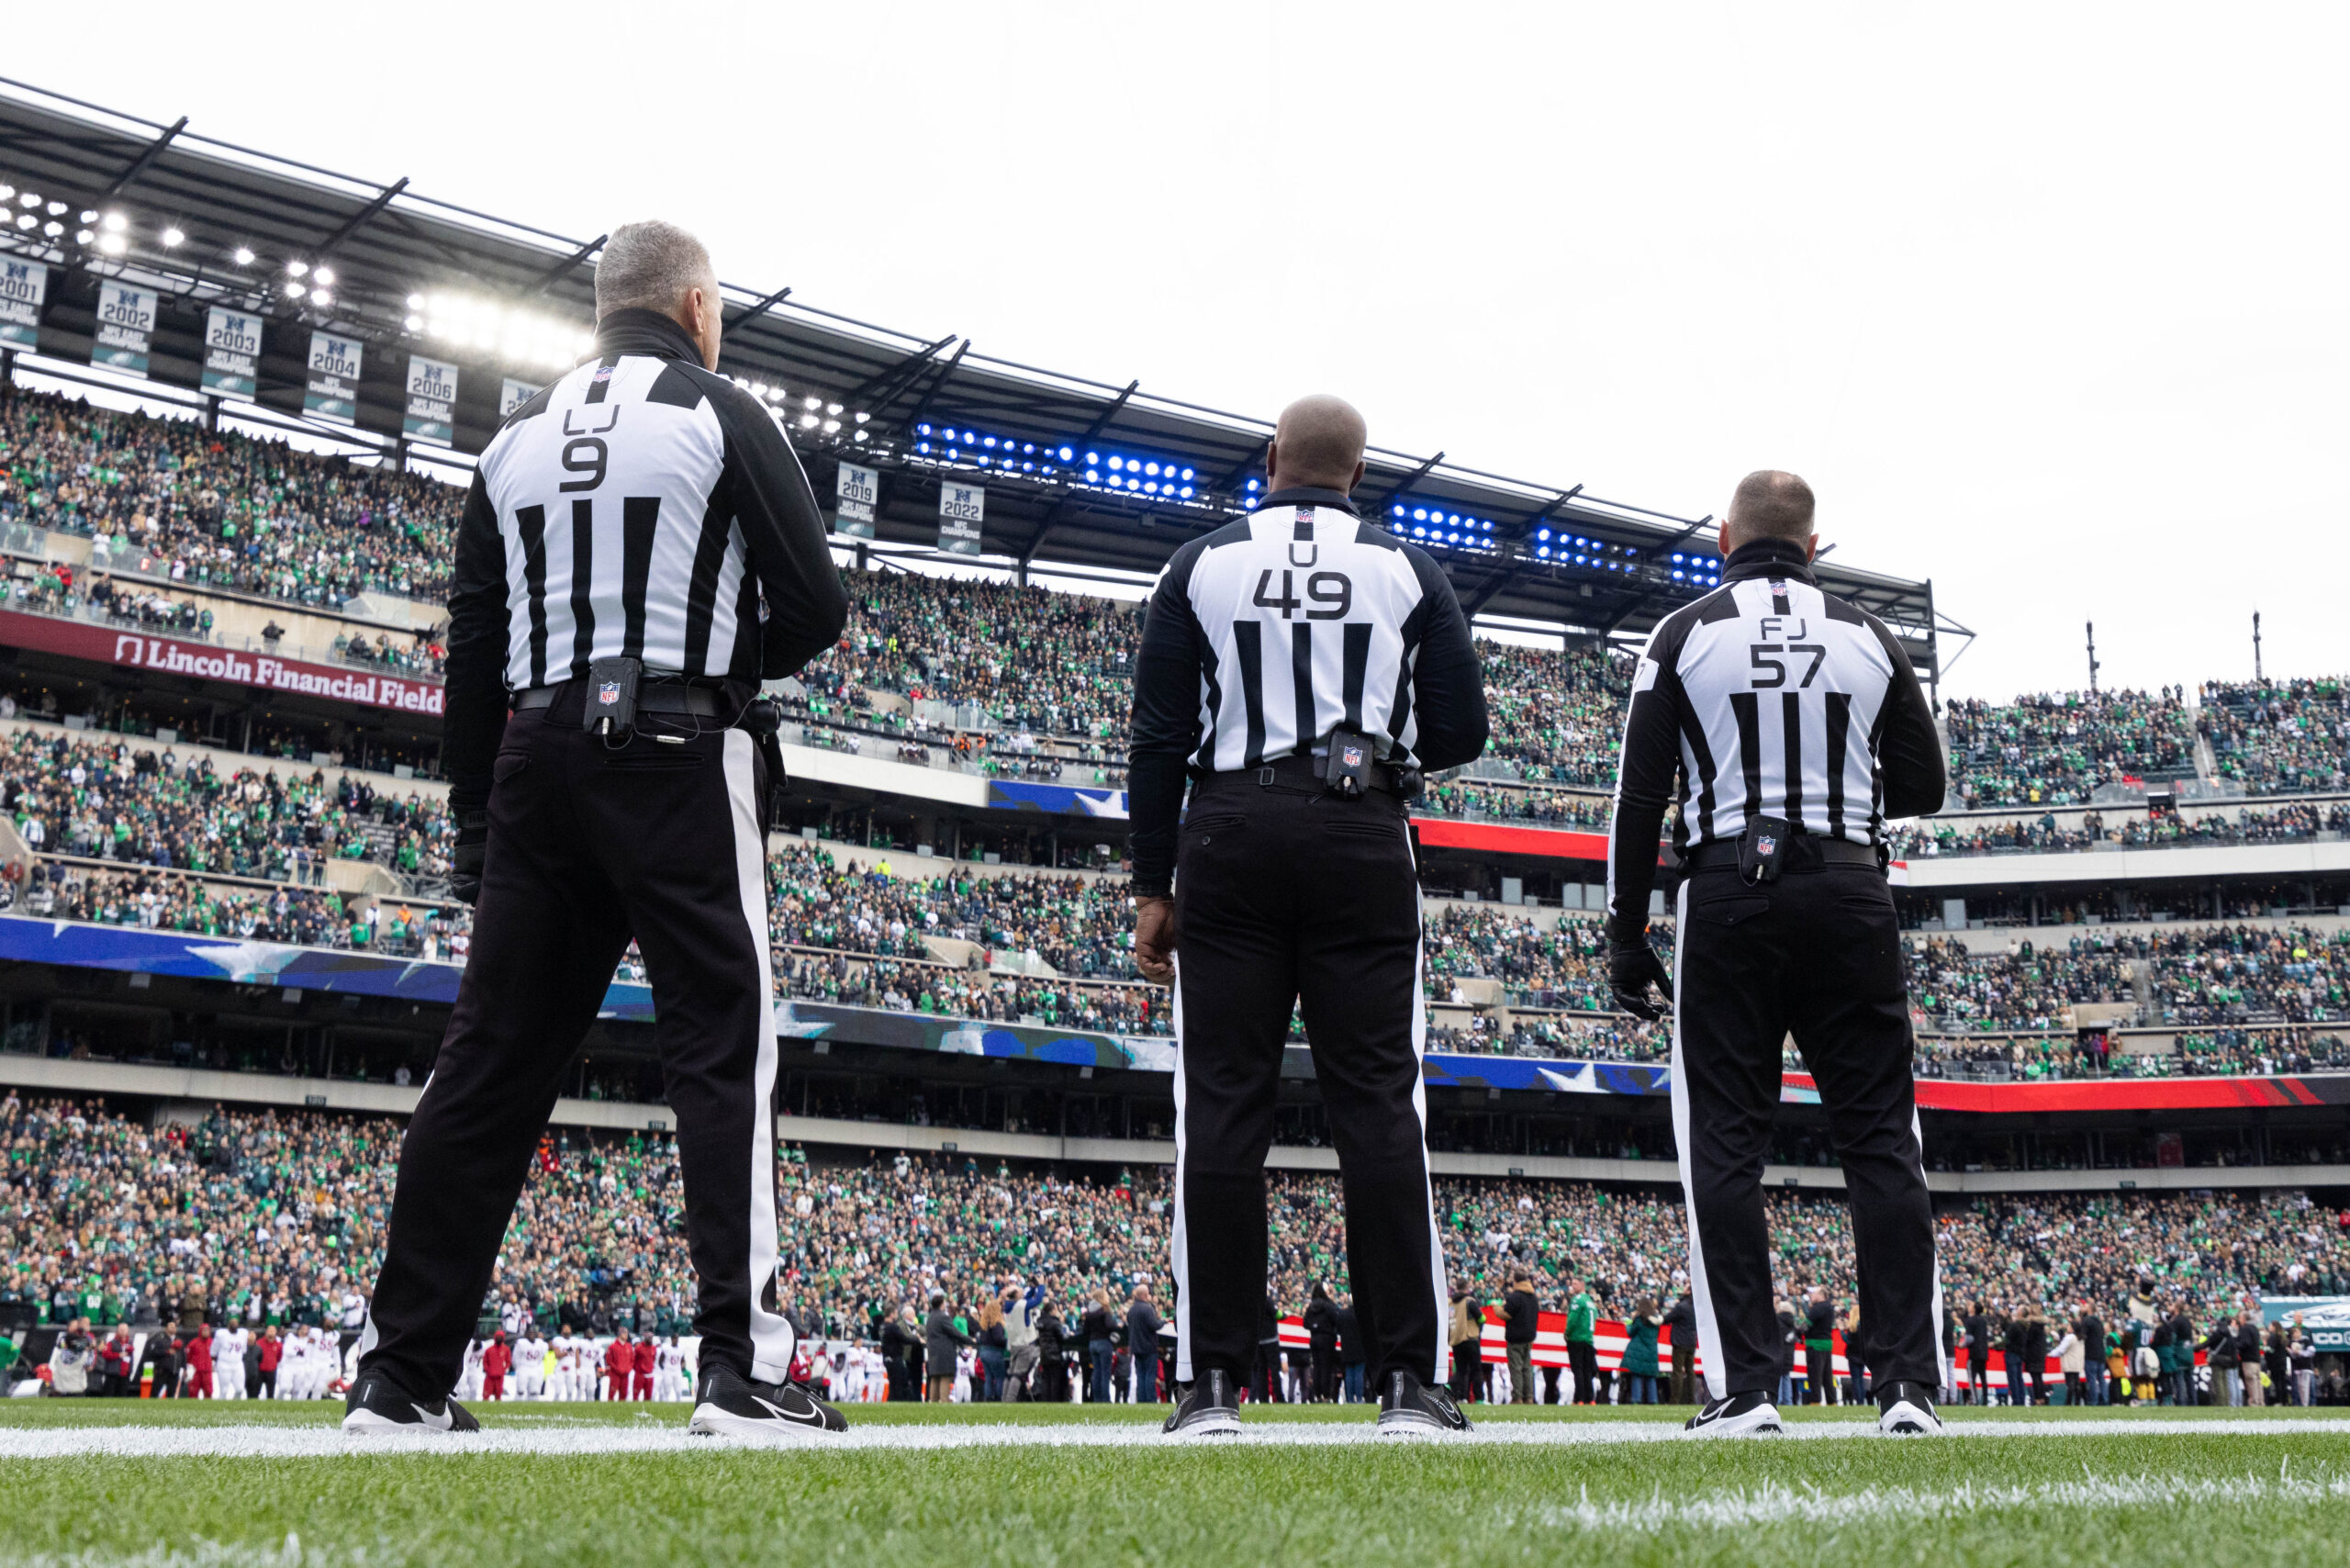 Three officials stand on the field during the National Anthem.